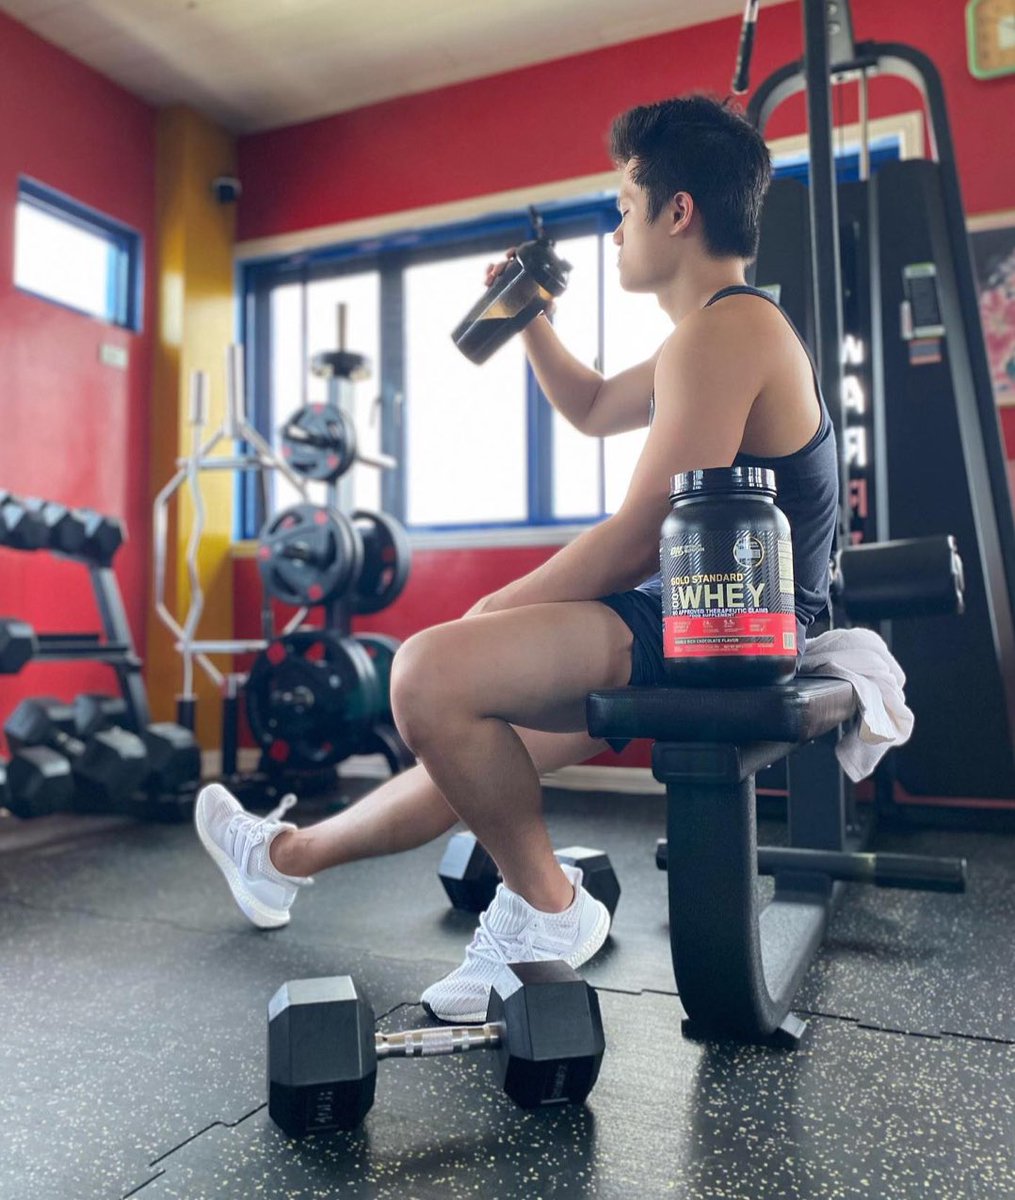 My routine wouldn’t be perfect w/o a post workout drink. 

Gratefully, I got Optimum Nutrition Whey protein. In just 24g of whey per serving, it would boost my muscle building/recovery. ON Gold standard is my postworkout drink and I am confident wth the protein quality im getting https://t.co/0C38pzojdj